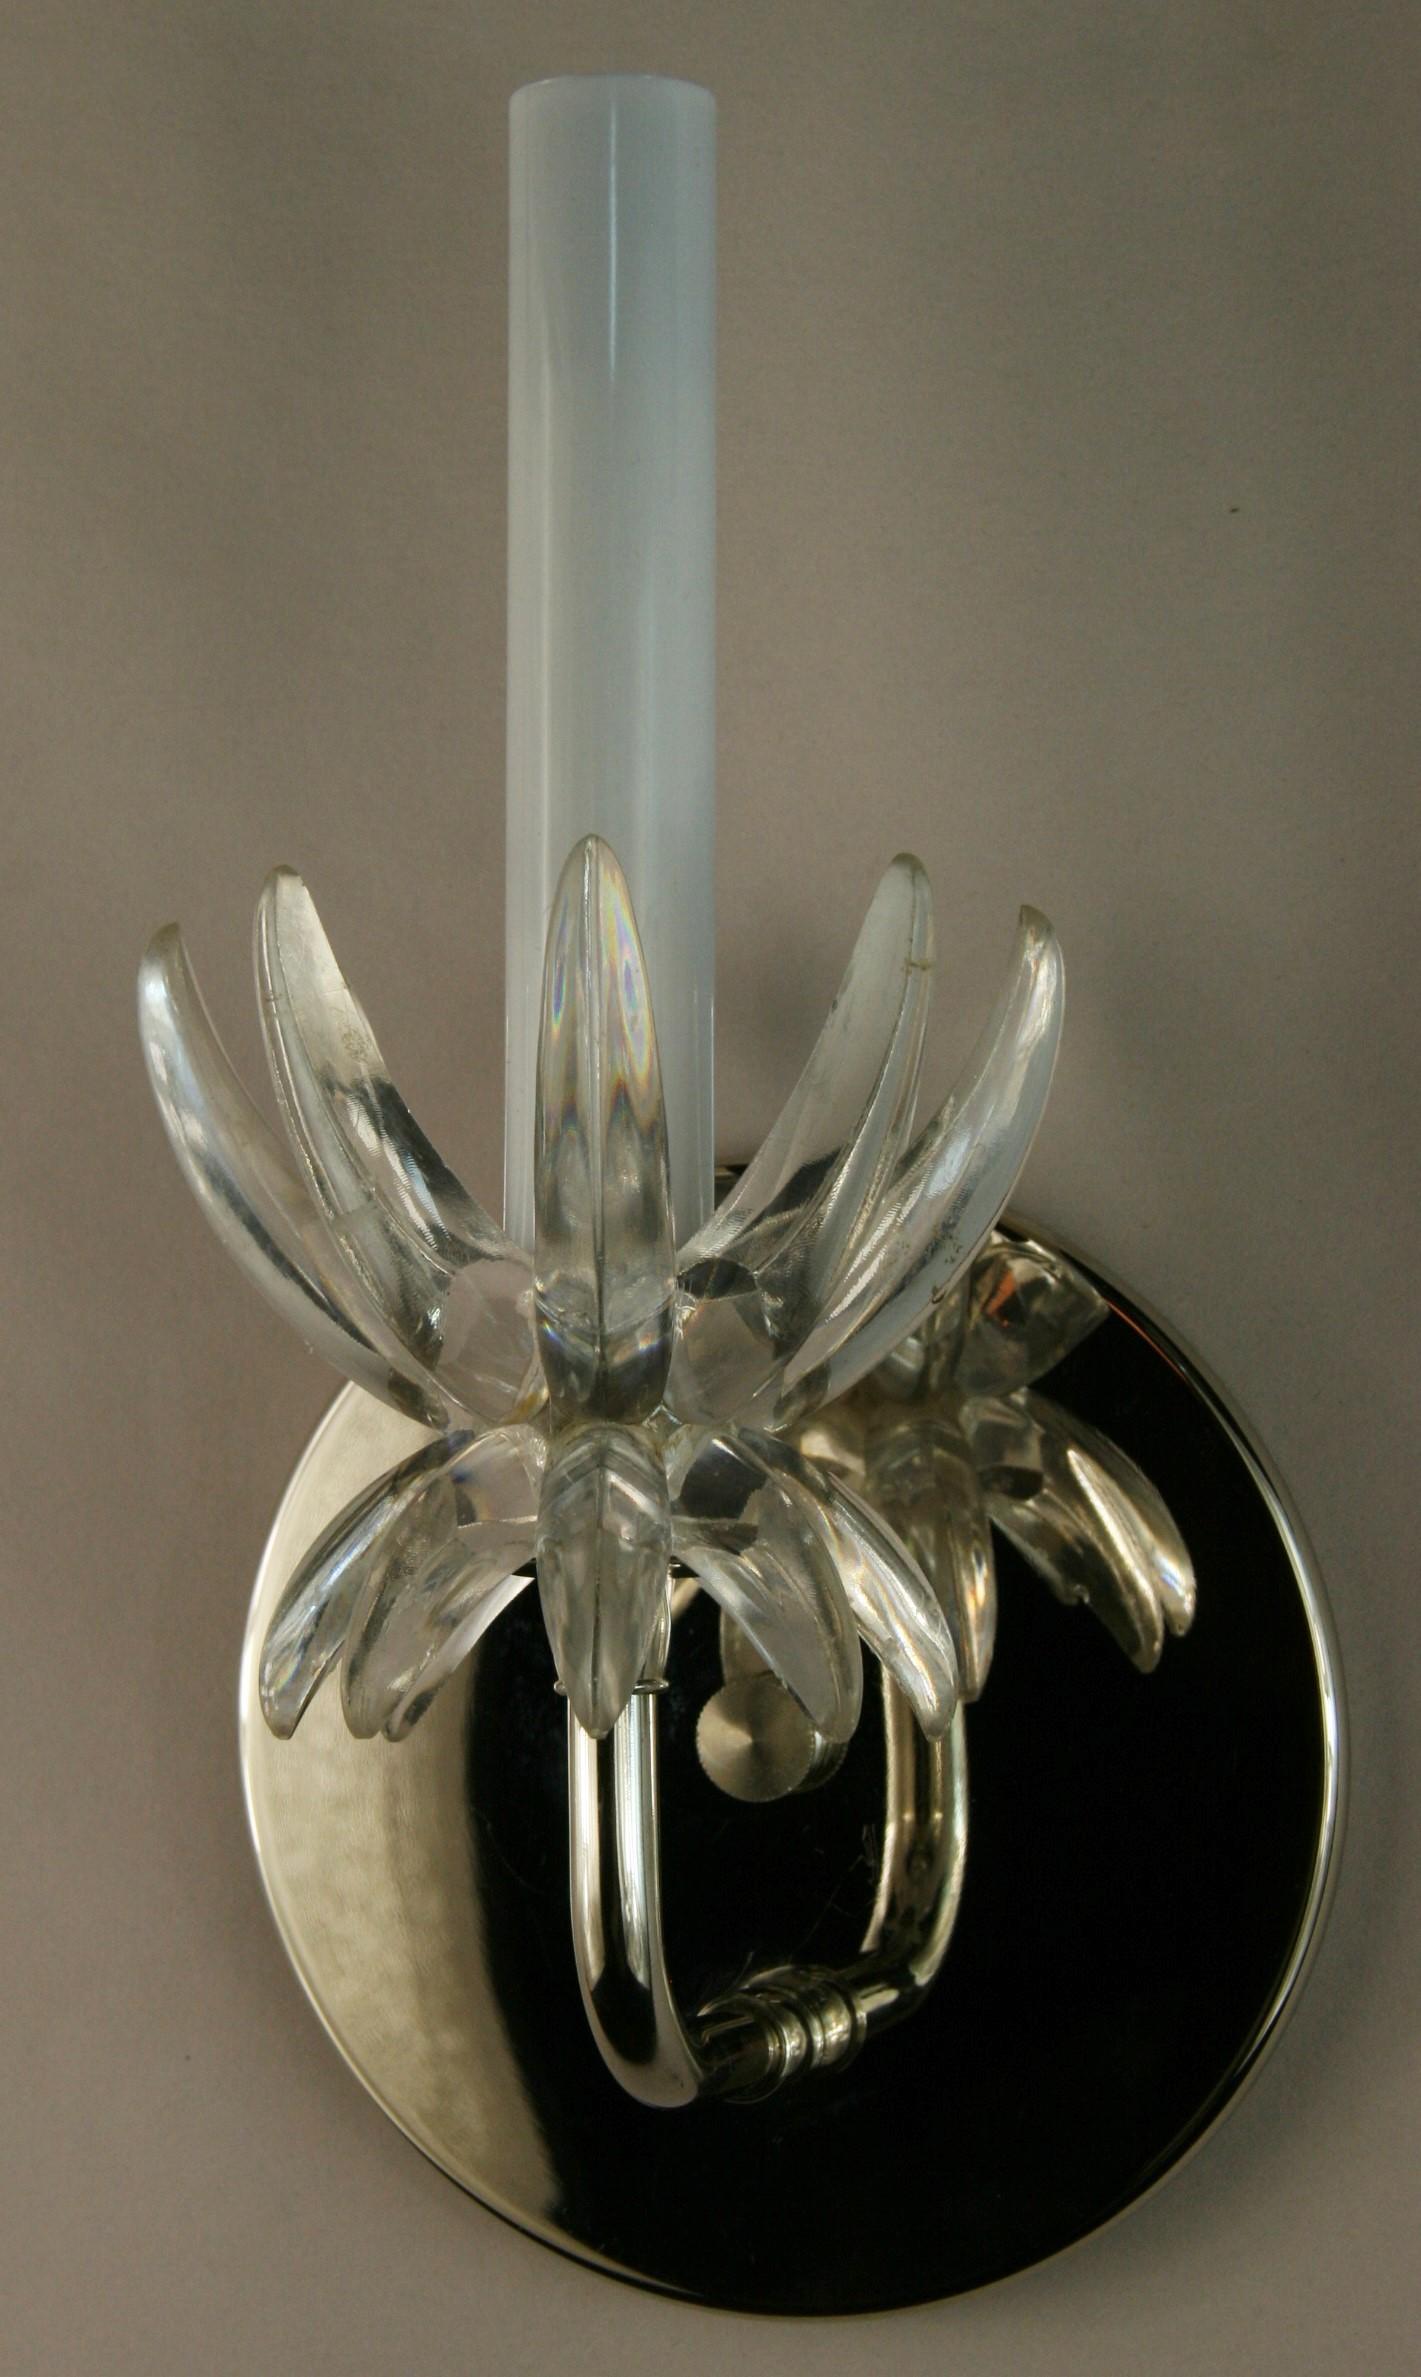 Mid-20th Century Pair of Western Germany Midcentury Acrylic and Nickel Sconces For Sale